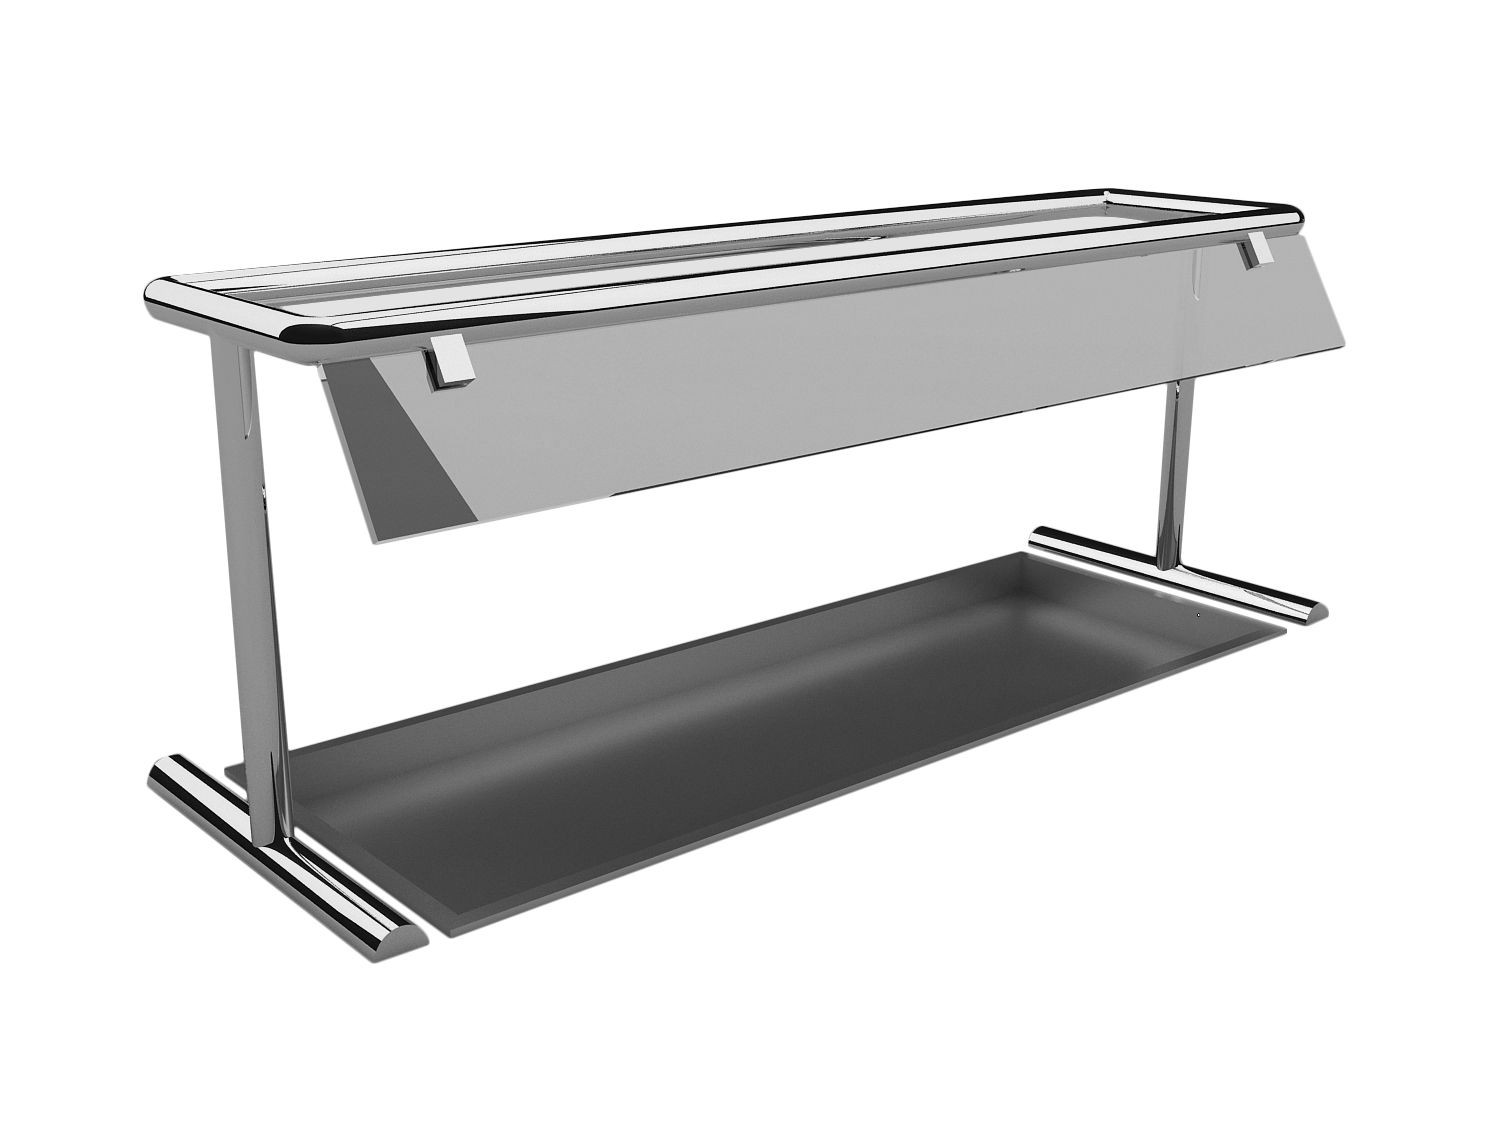 Bon Chef 90104SS Portable Single Sided Sneeze Guard with Stainless Steel Brushed Finish Structure, 59" x 18" x 20 1/2"